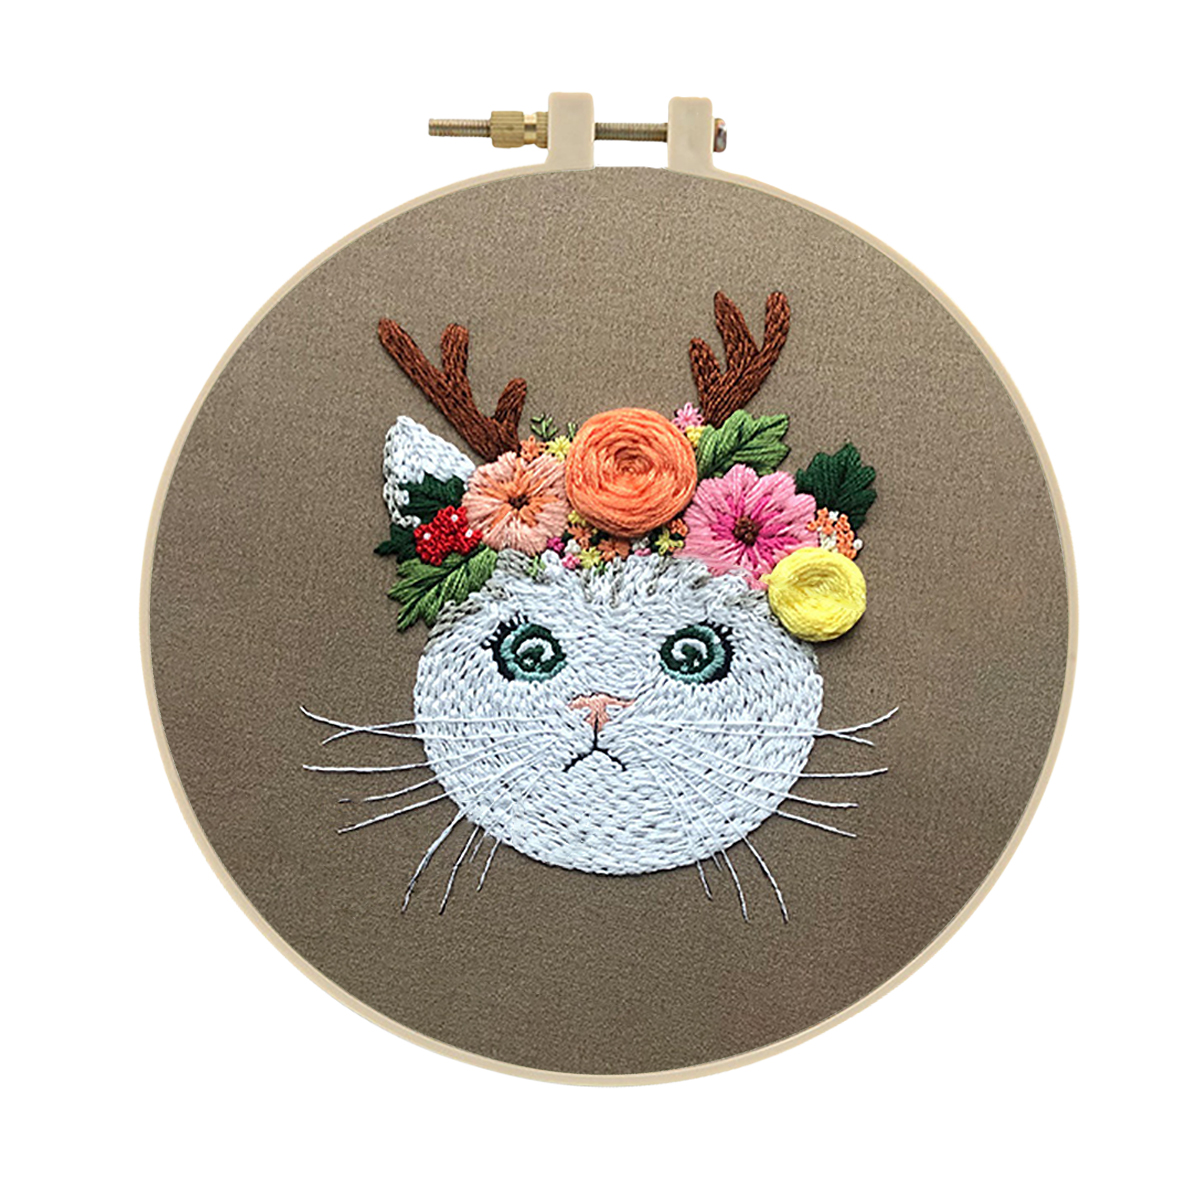 Embroidery starter kit for Adult Beginner - Cute Cat with Antlers Pattern